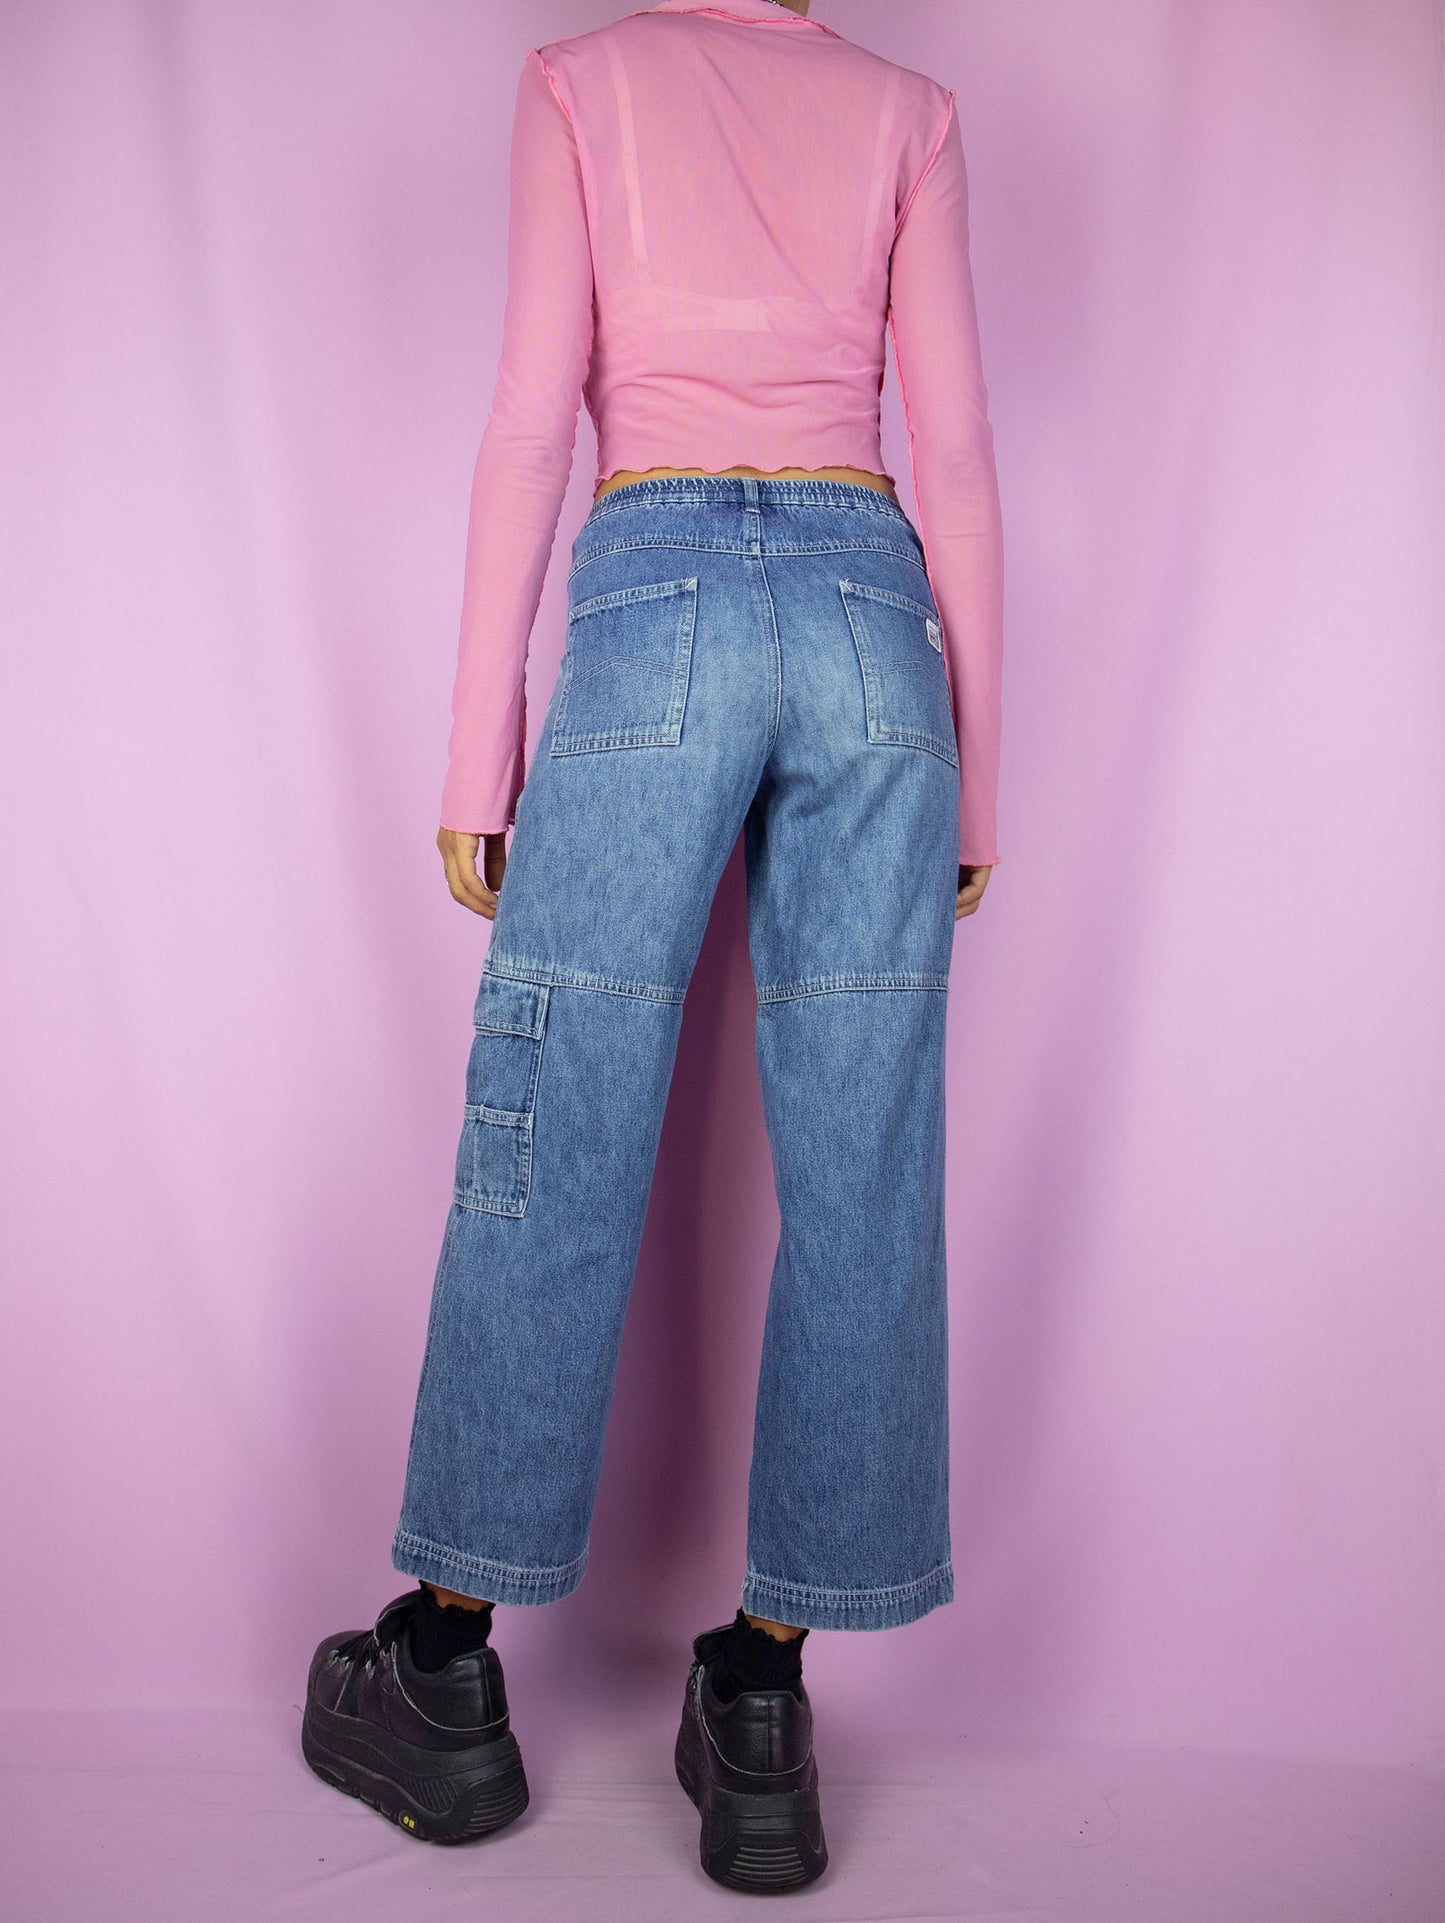 The Y2K Wide Cropped Jeans are vintage 2000s mid-rise cargo ankle denim pants with pockets and zipper closure.